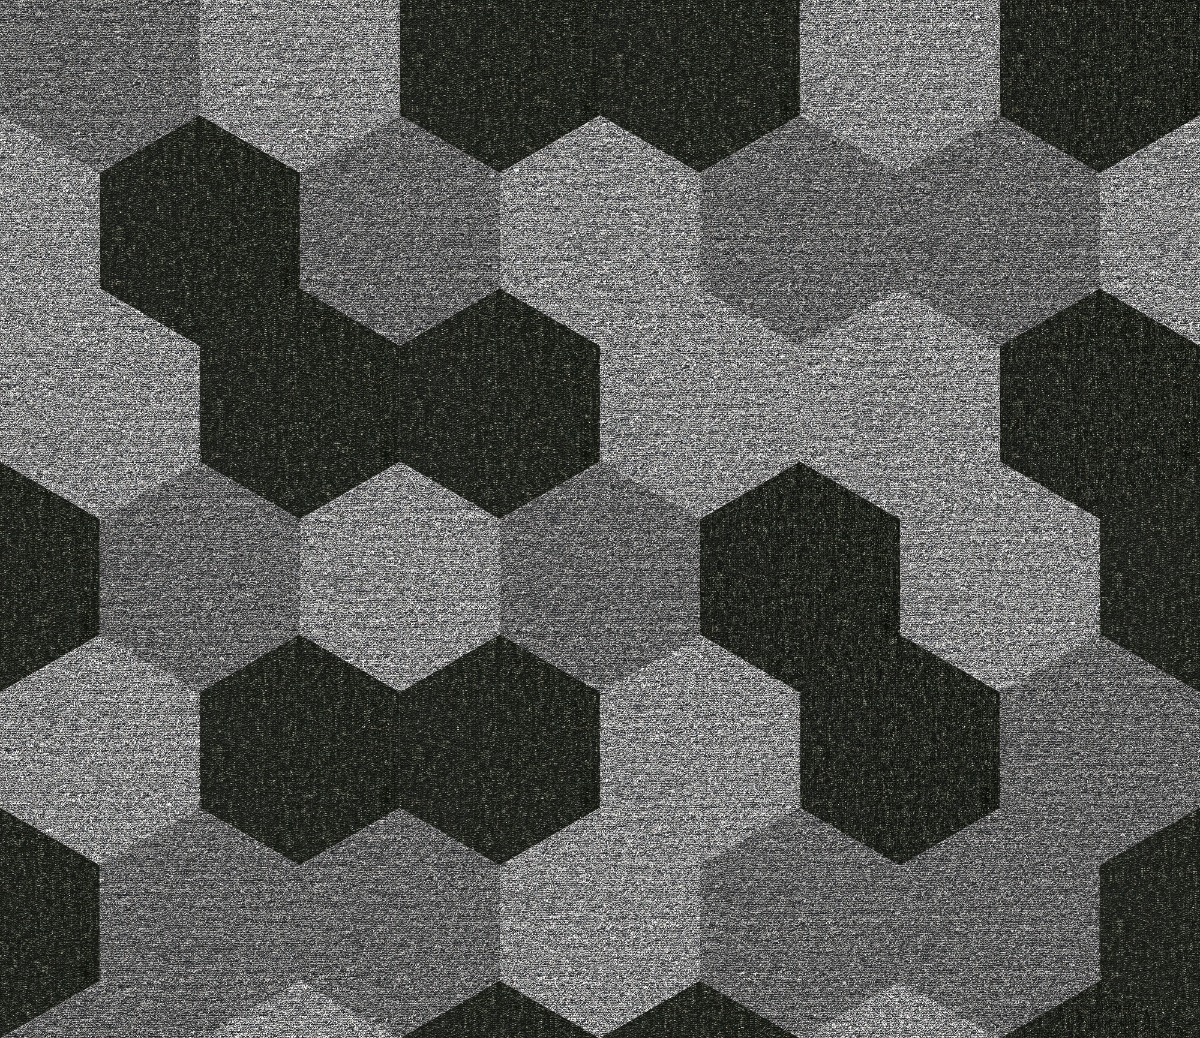 A seamless carpet texture with loop pile carpet units arranged in a Hexagonal pattern